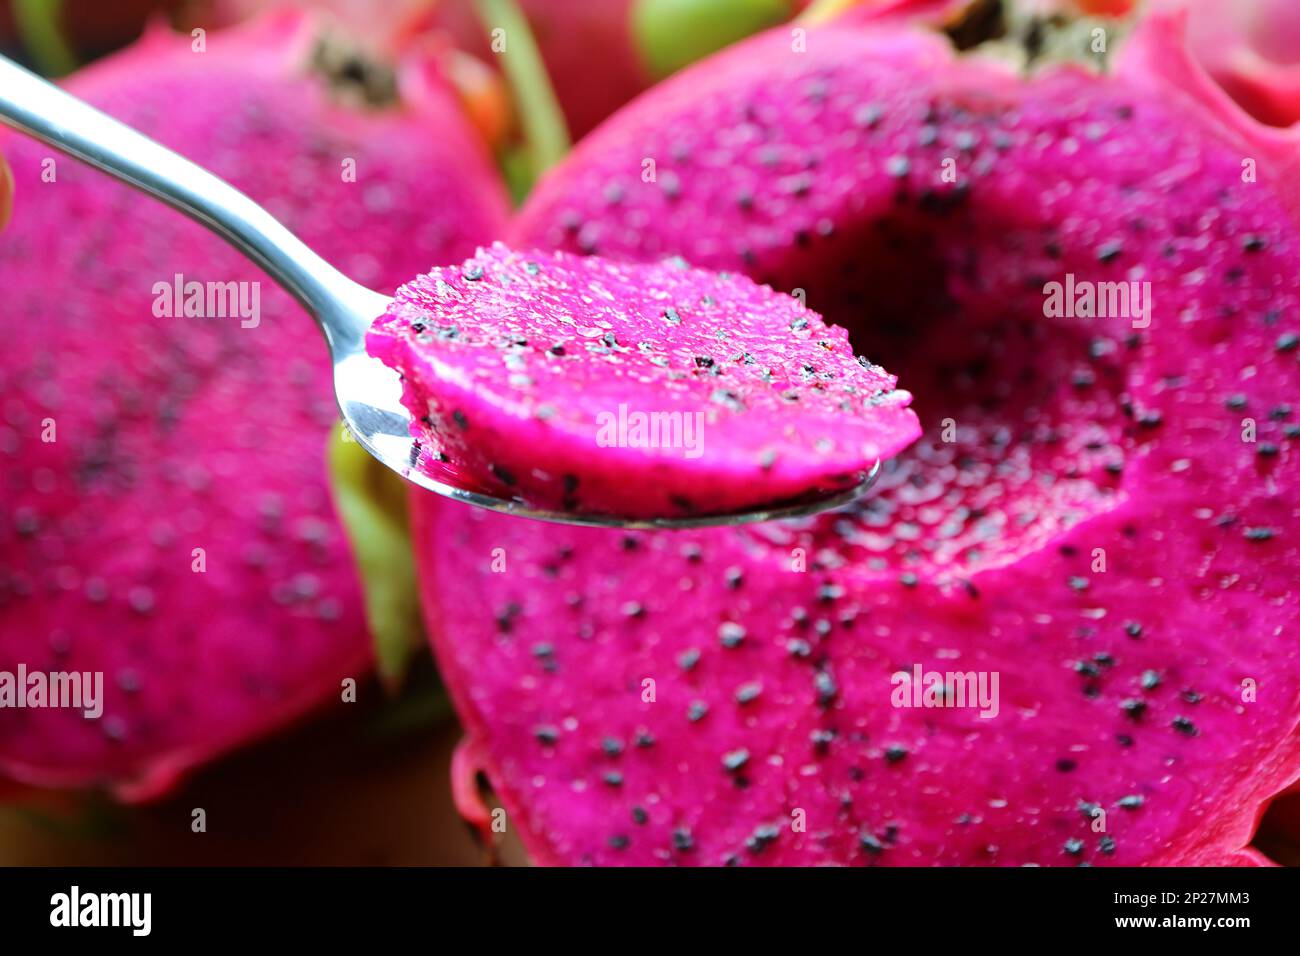 Closeup of Spoon Scooping Delectable Red Flesh of Dragon Fruits also Called Pink Pitaya or Strawberry Pear Stock Photo